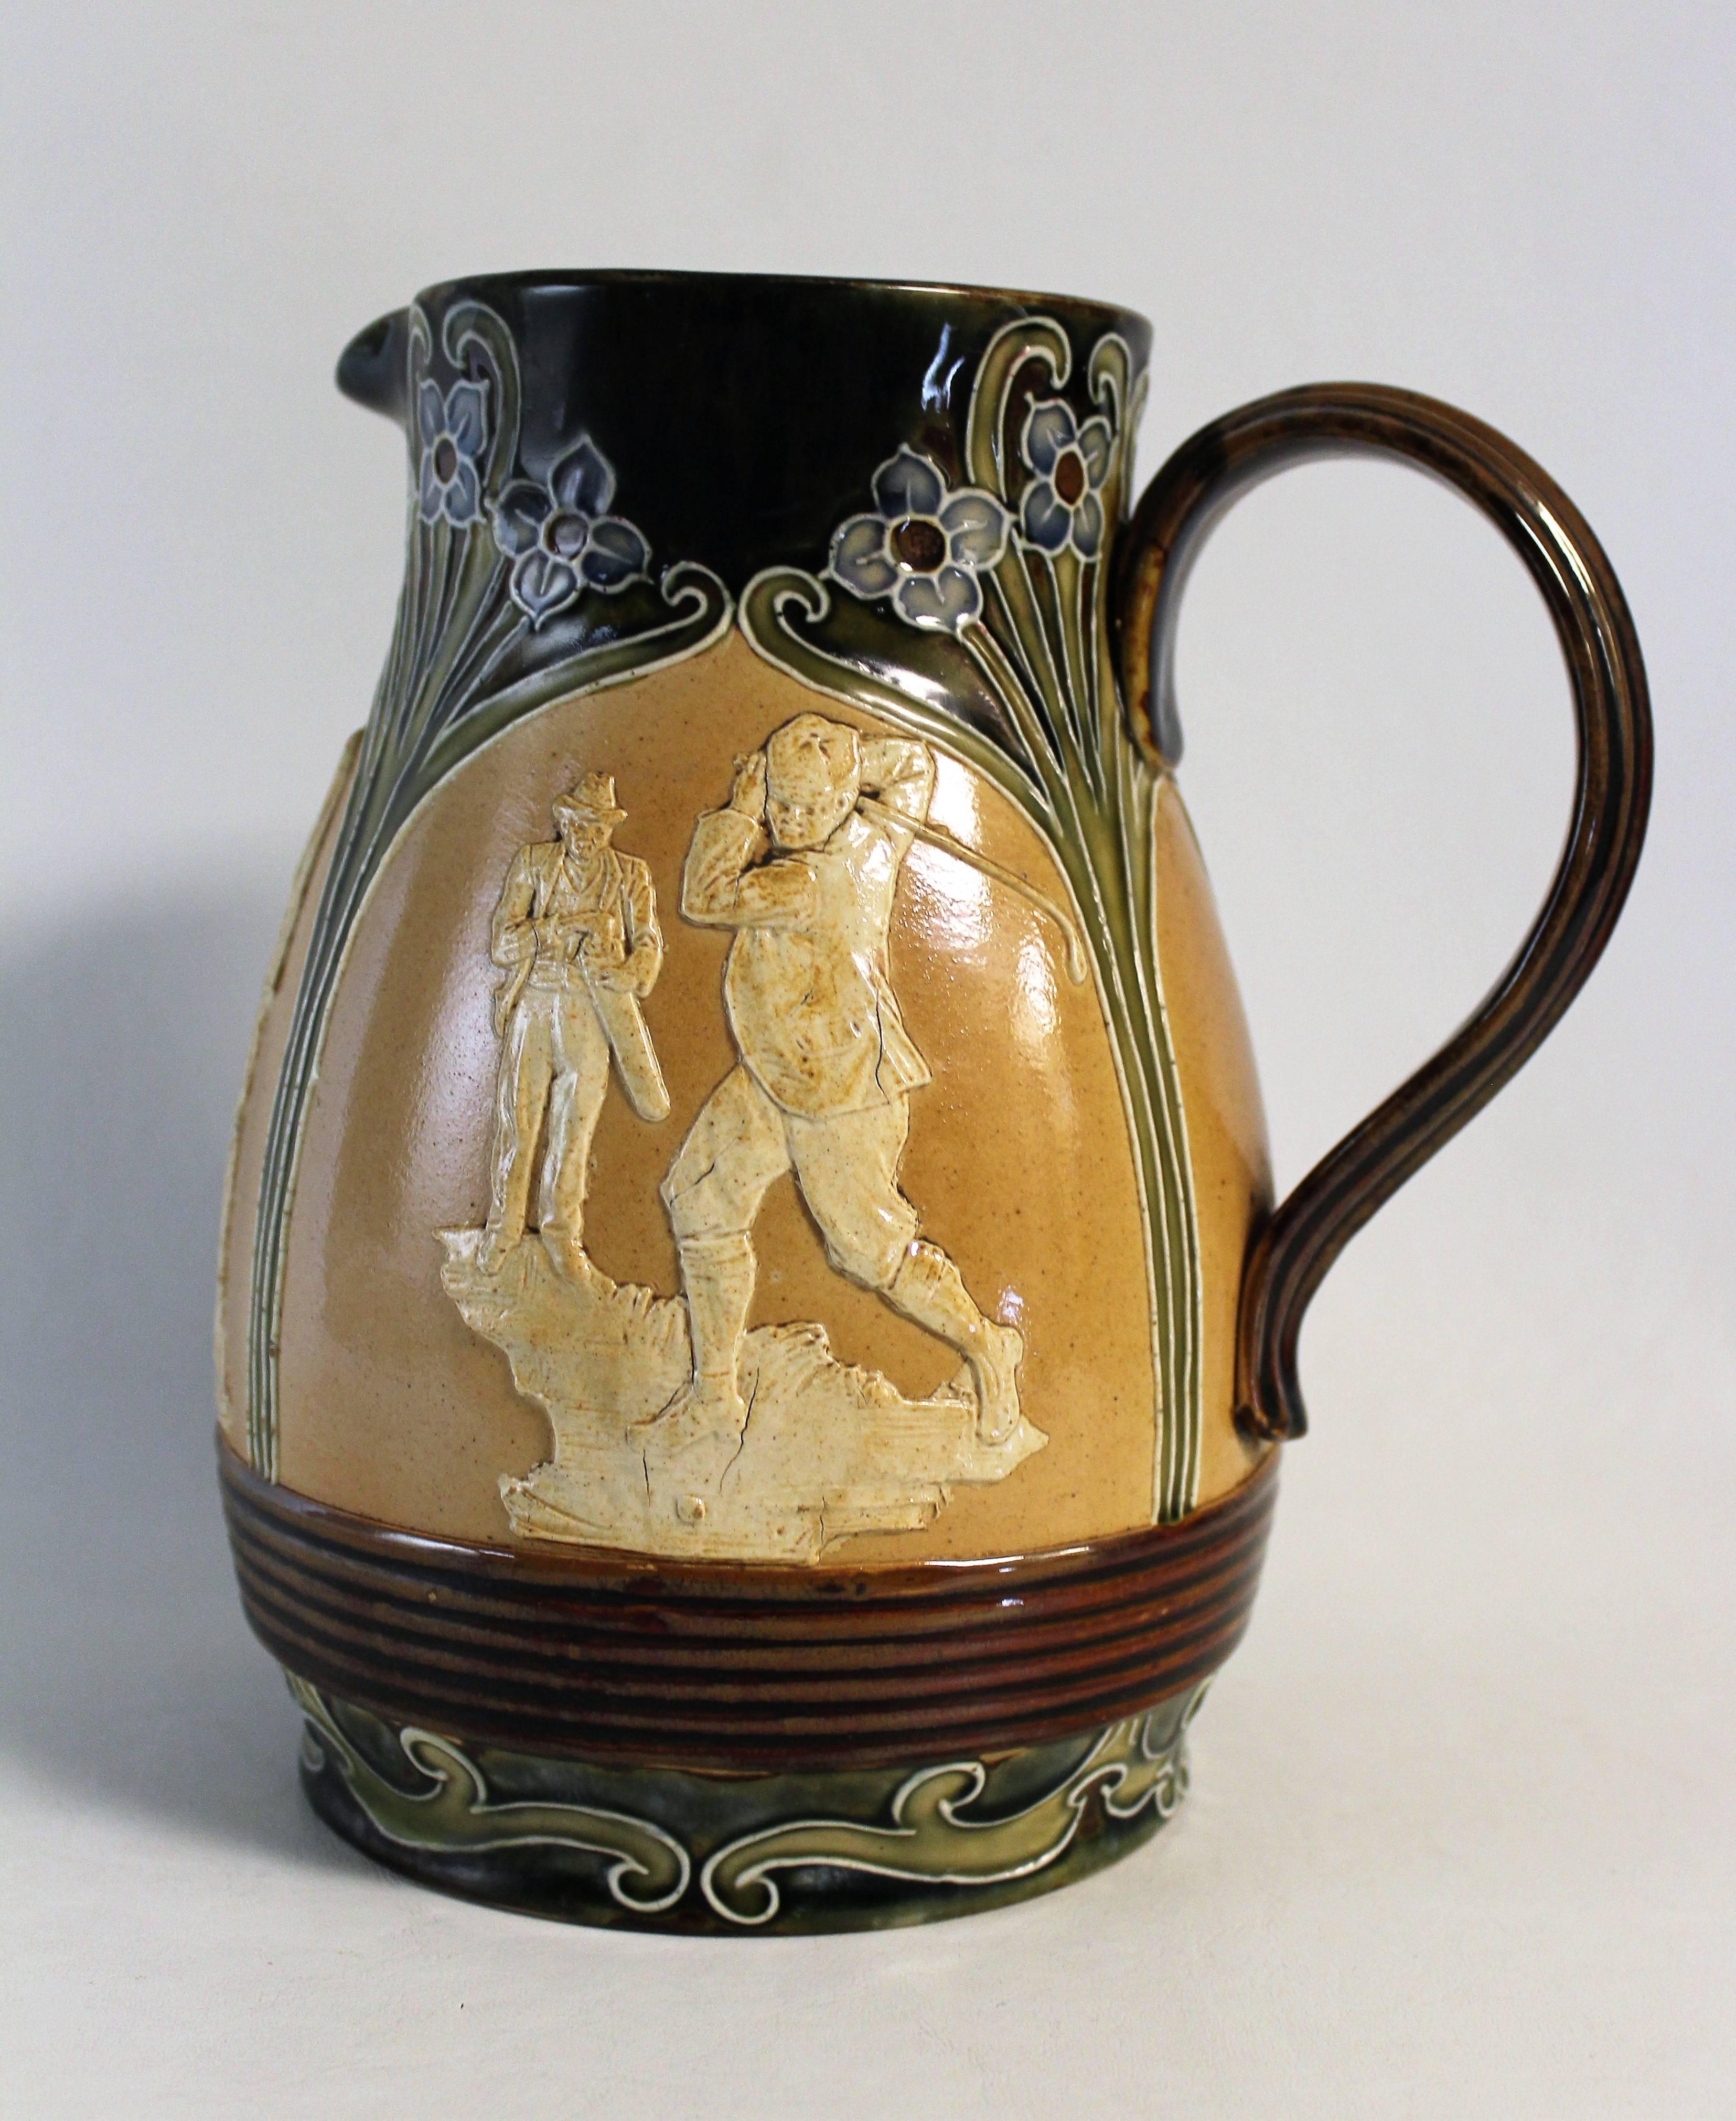 An Art Nouveau stoneware bulbous pitcher with stylised foliate decoration and three golfer scenes featured in relief: Lost ball, putting and the drive amongst Art Nouveau panels.